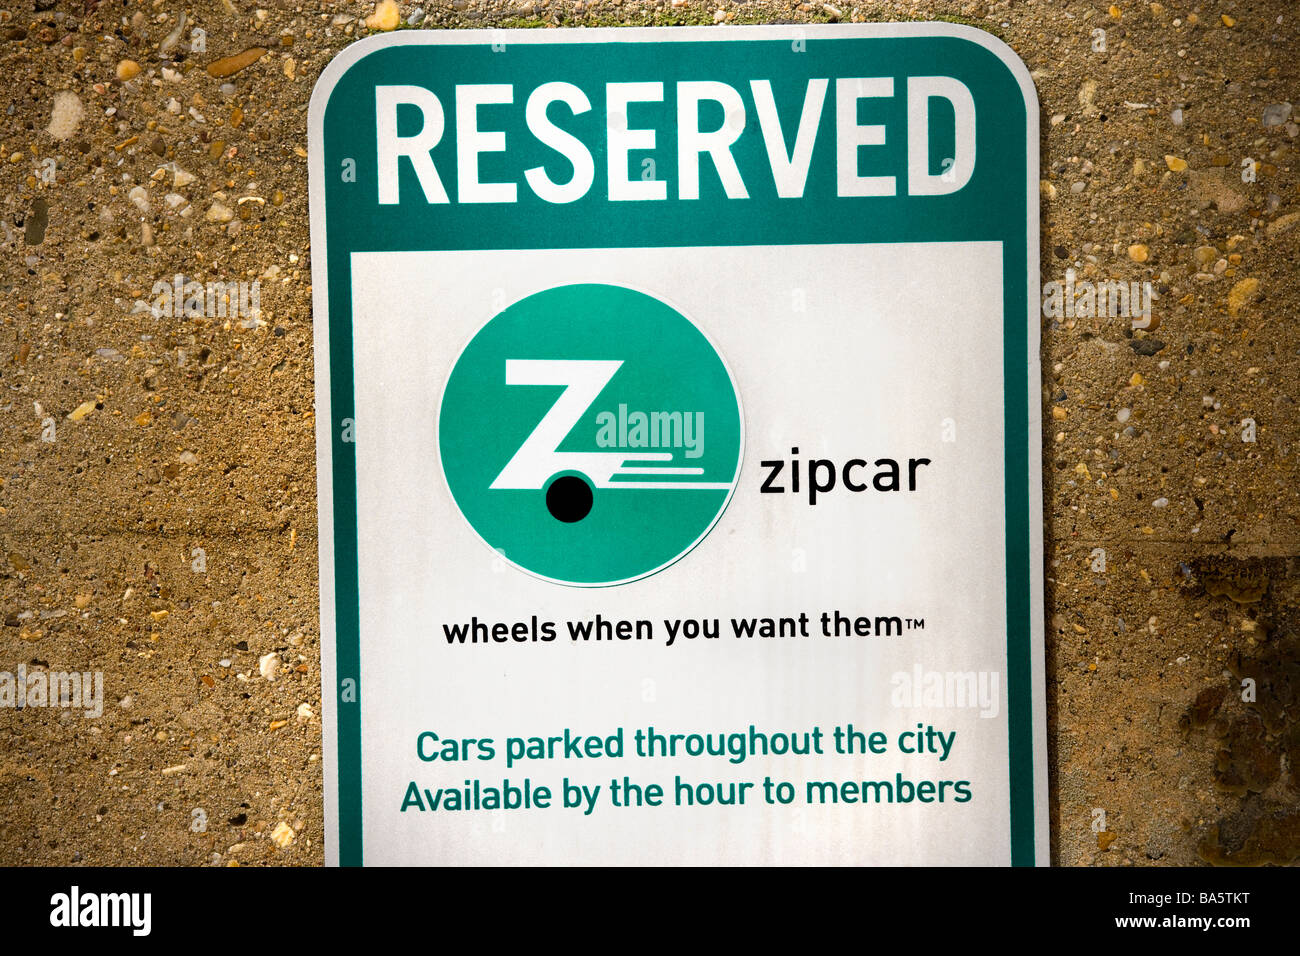 A Zipcar reserved parking sign in Washington DC US Stock Photo